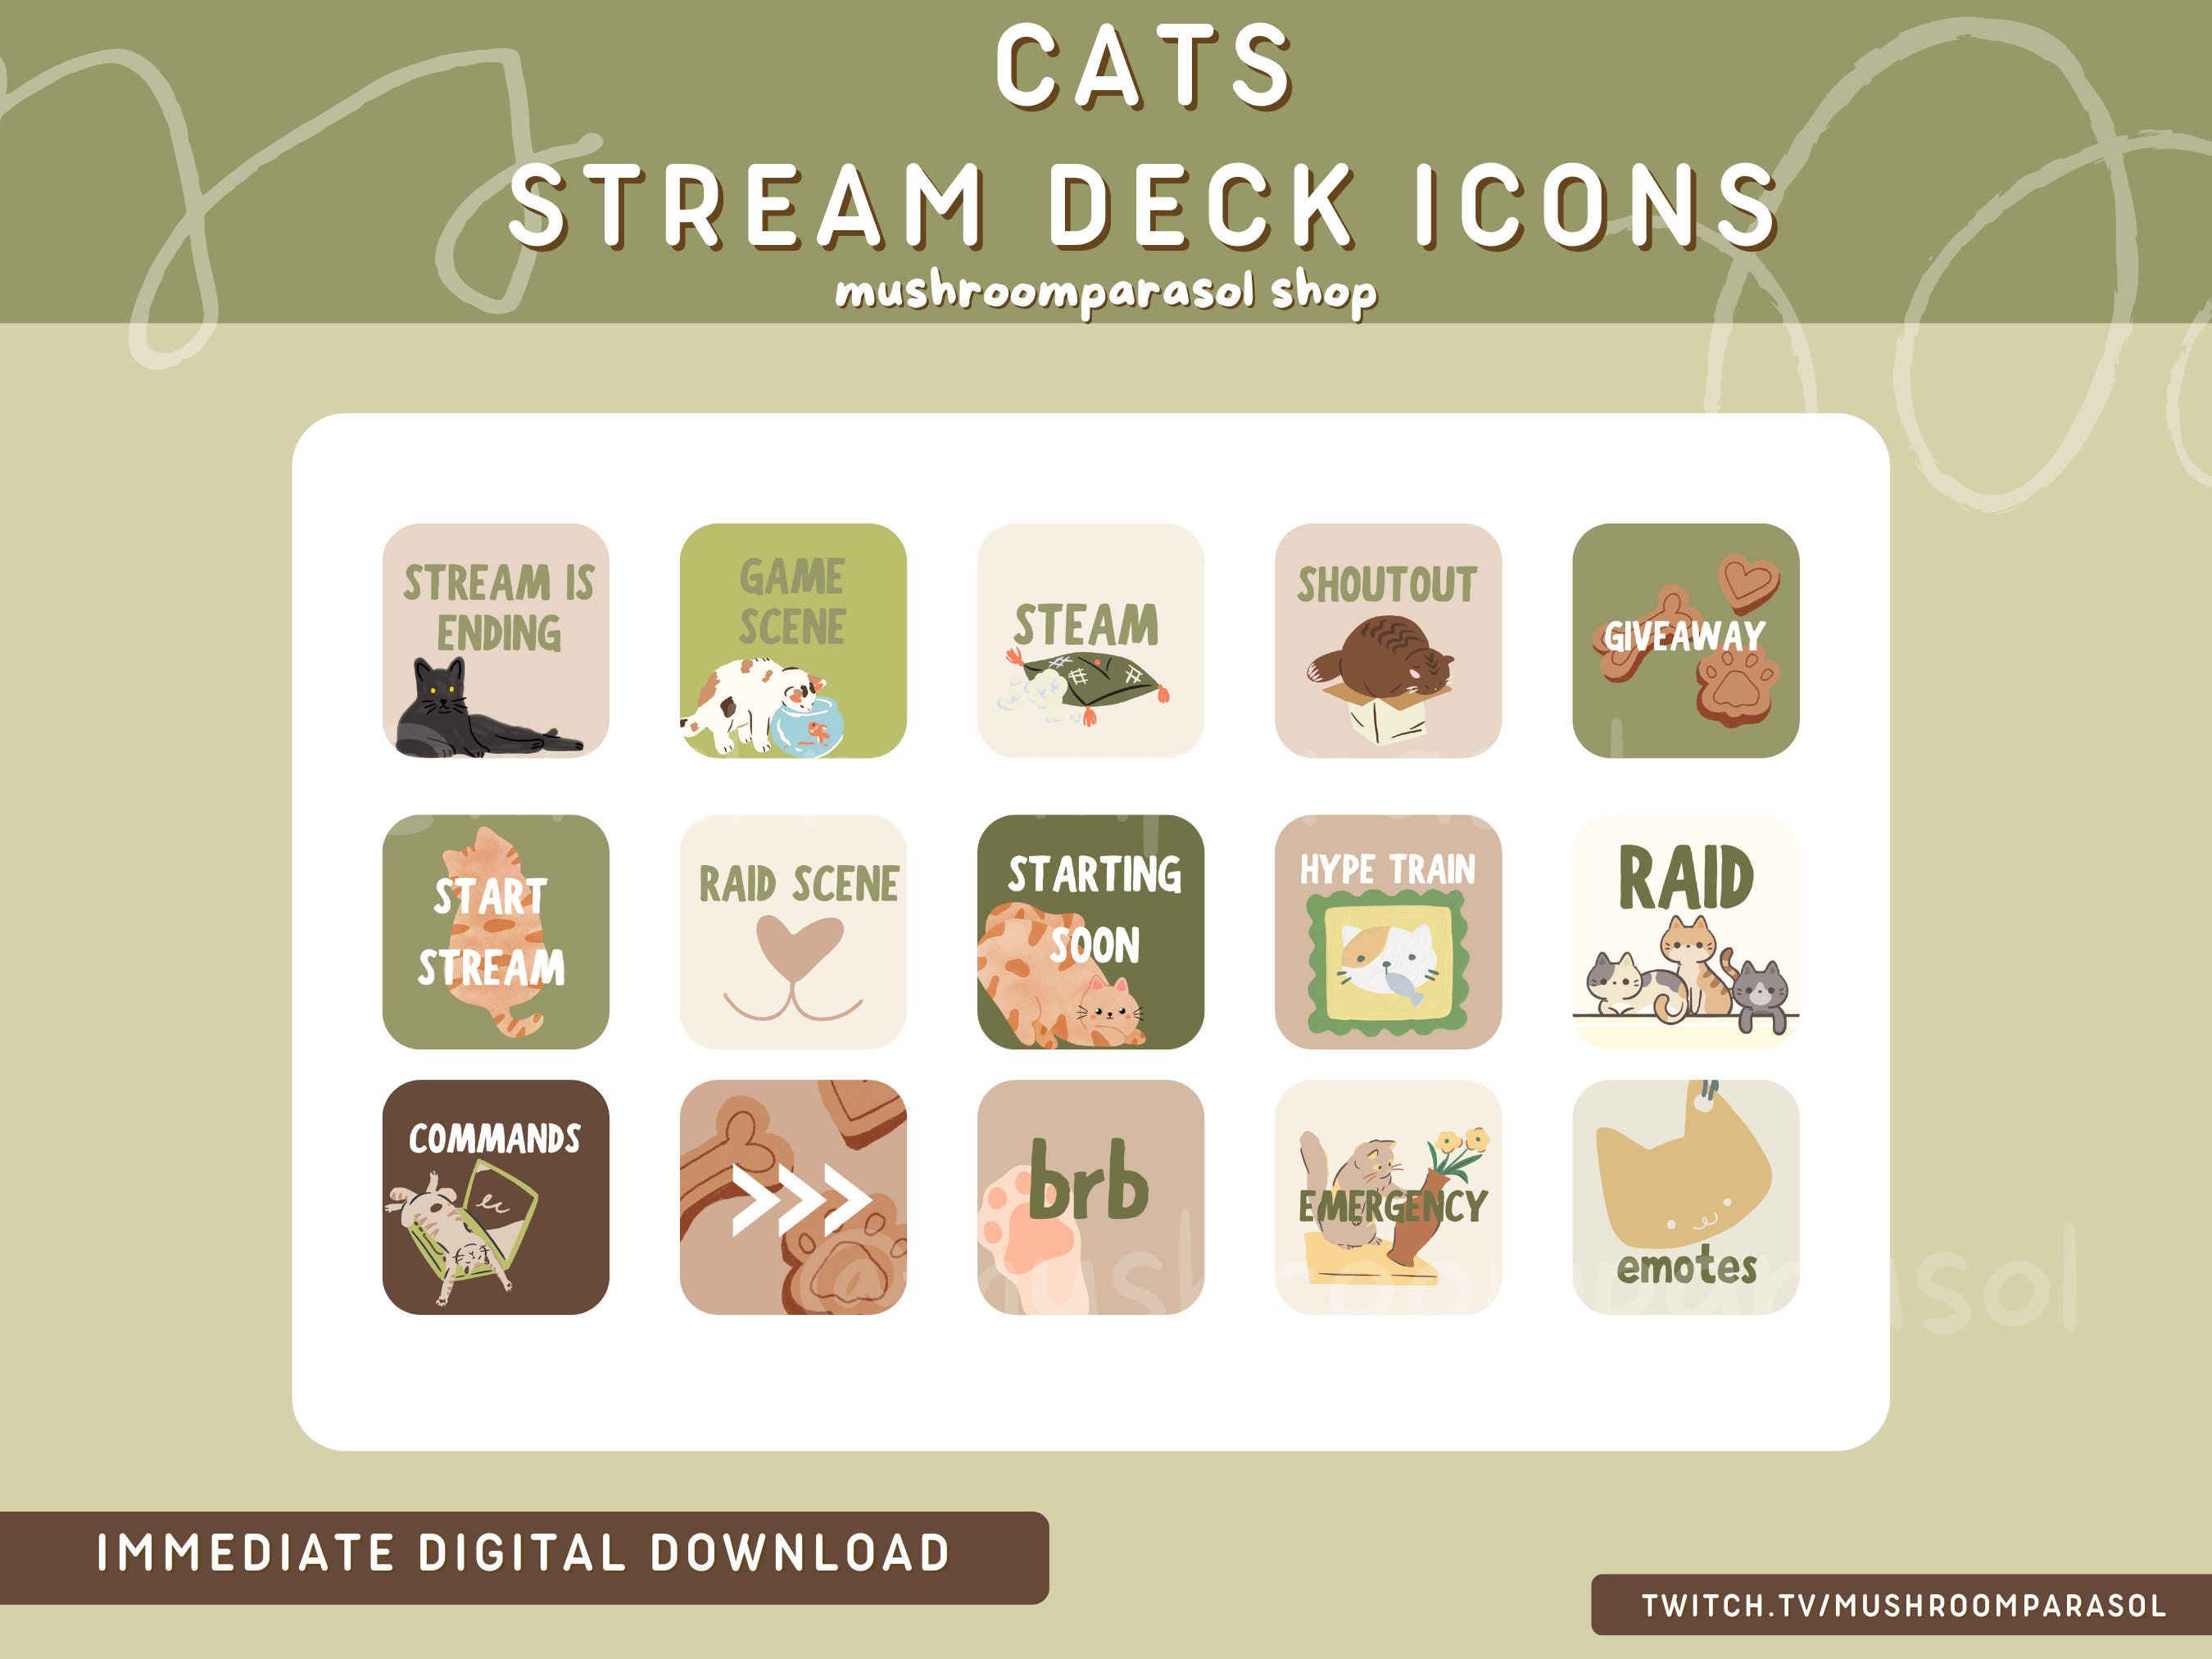 cat icons, aesthetic and cats icons - image #7690571 on